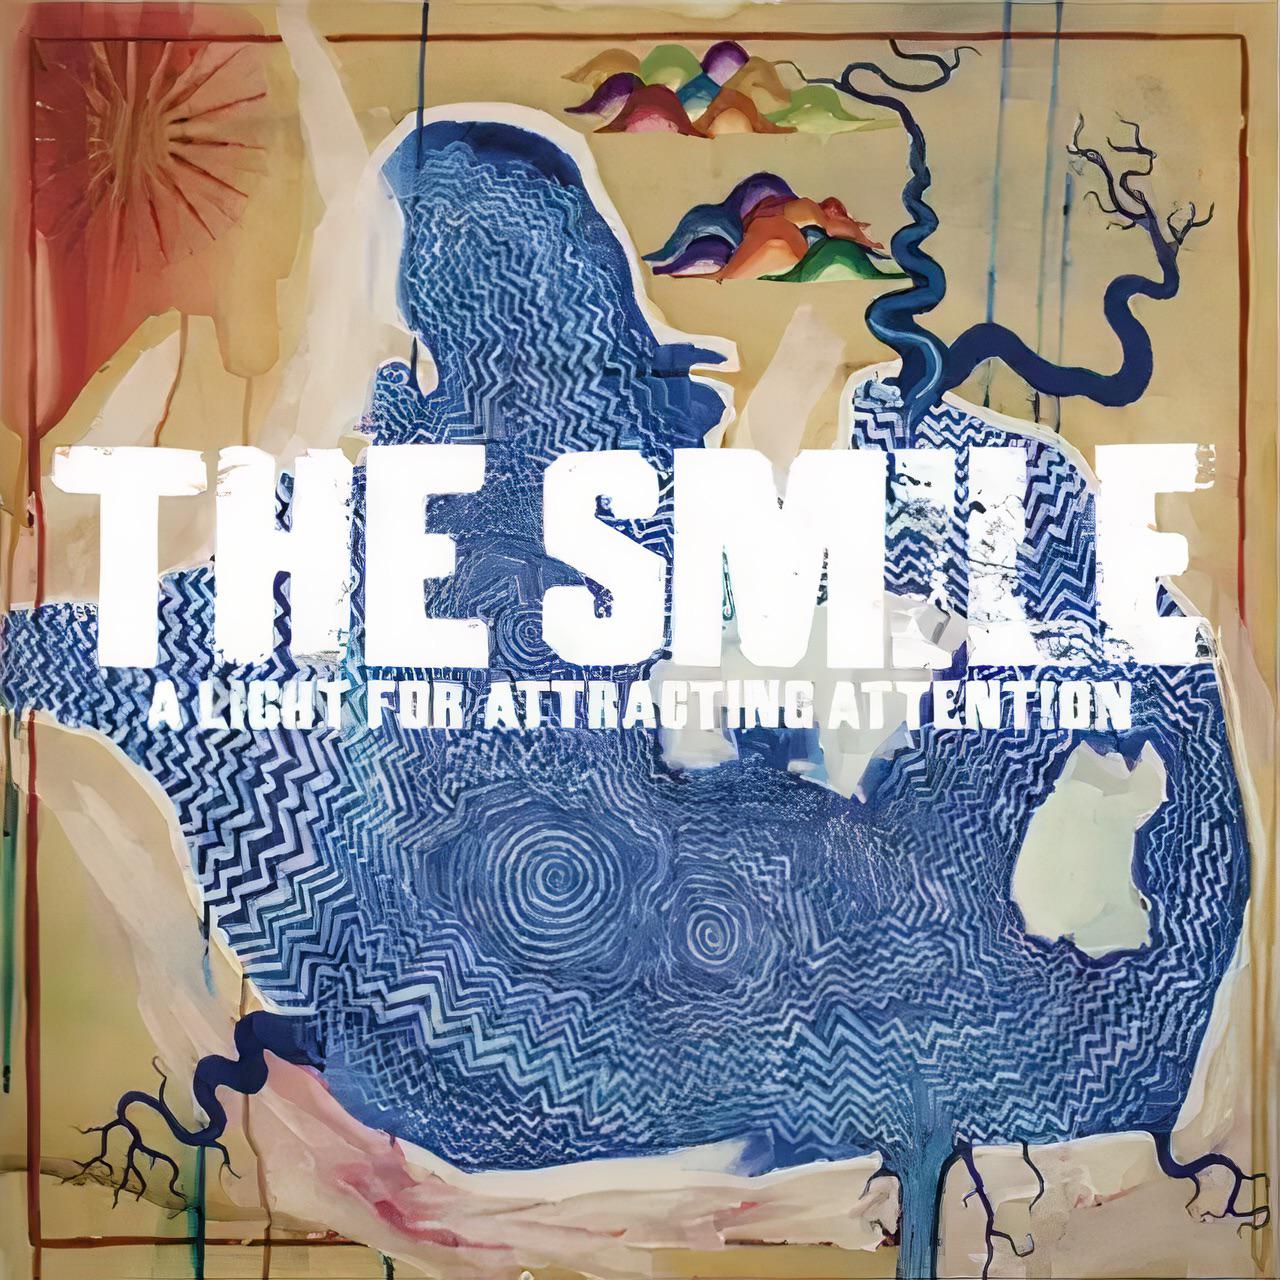 The Smile A Light for Attracting Attention cover artwork